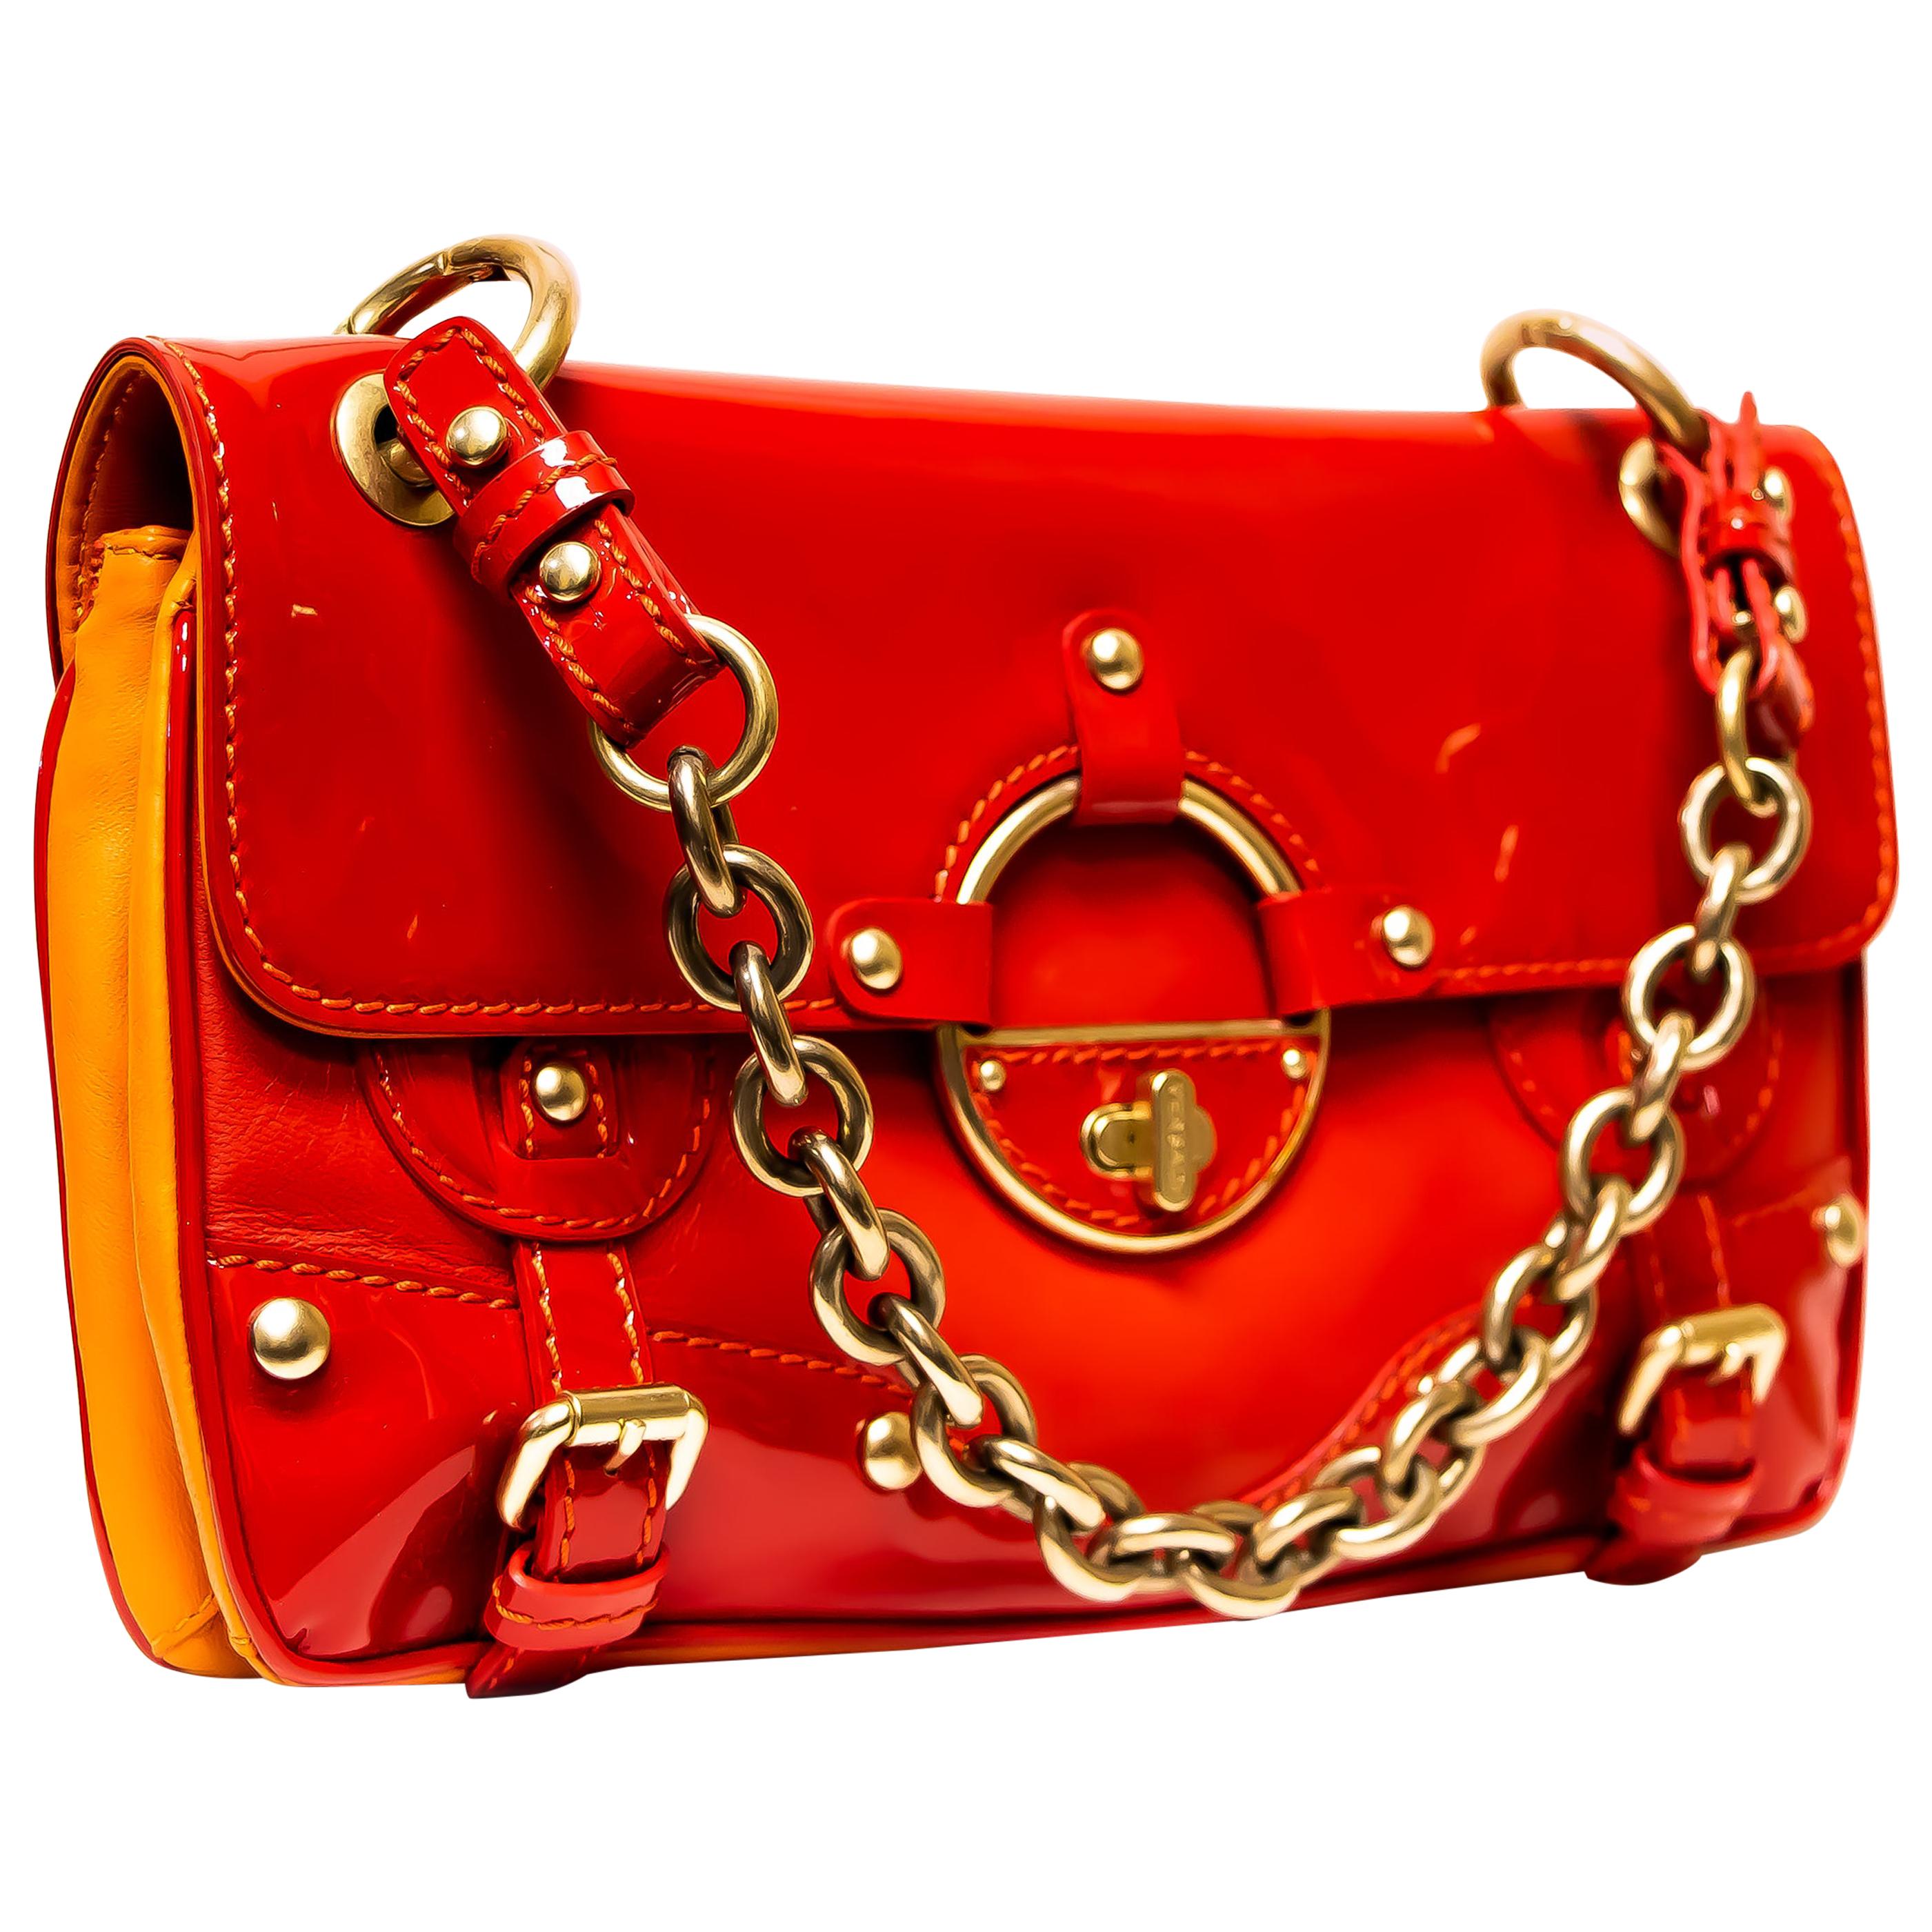 Versace 2010 Collection Patent Leather Red & Gold Handbag